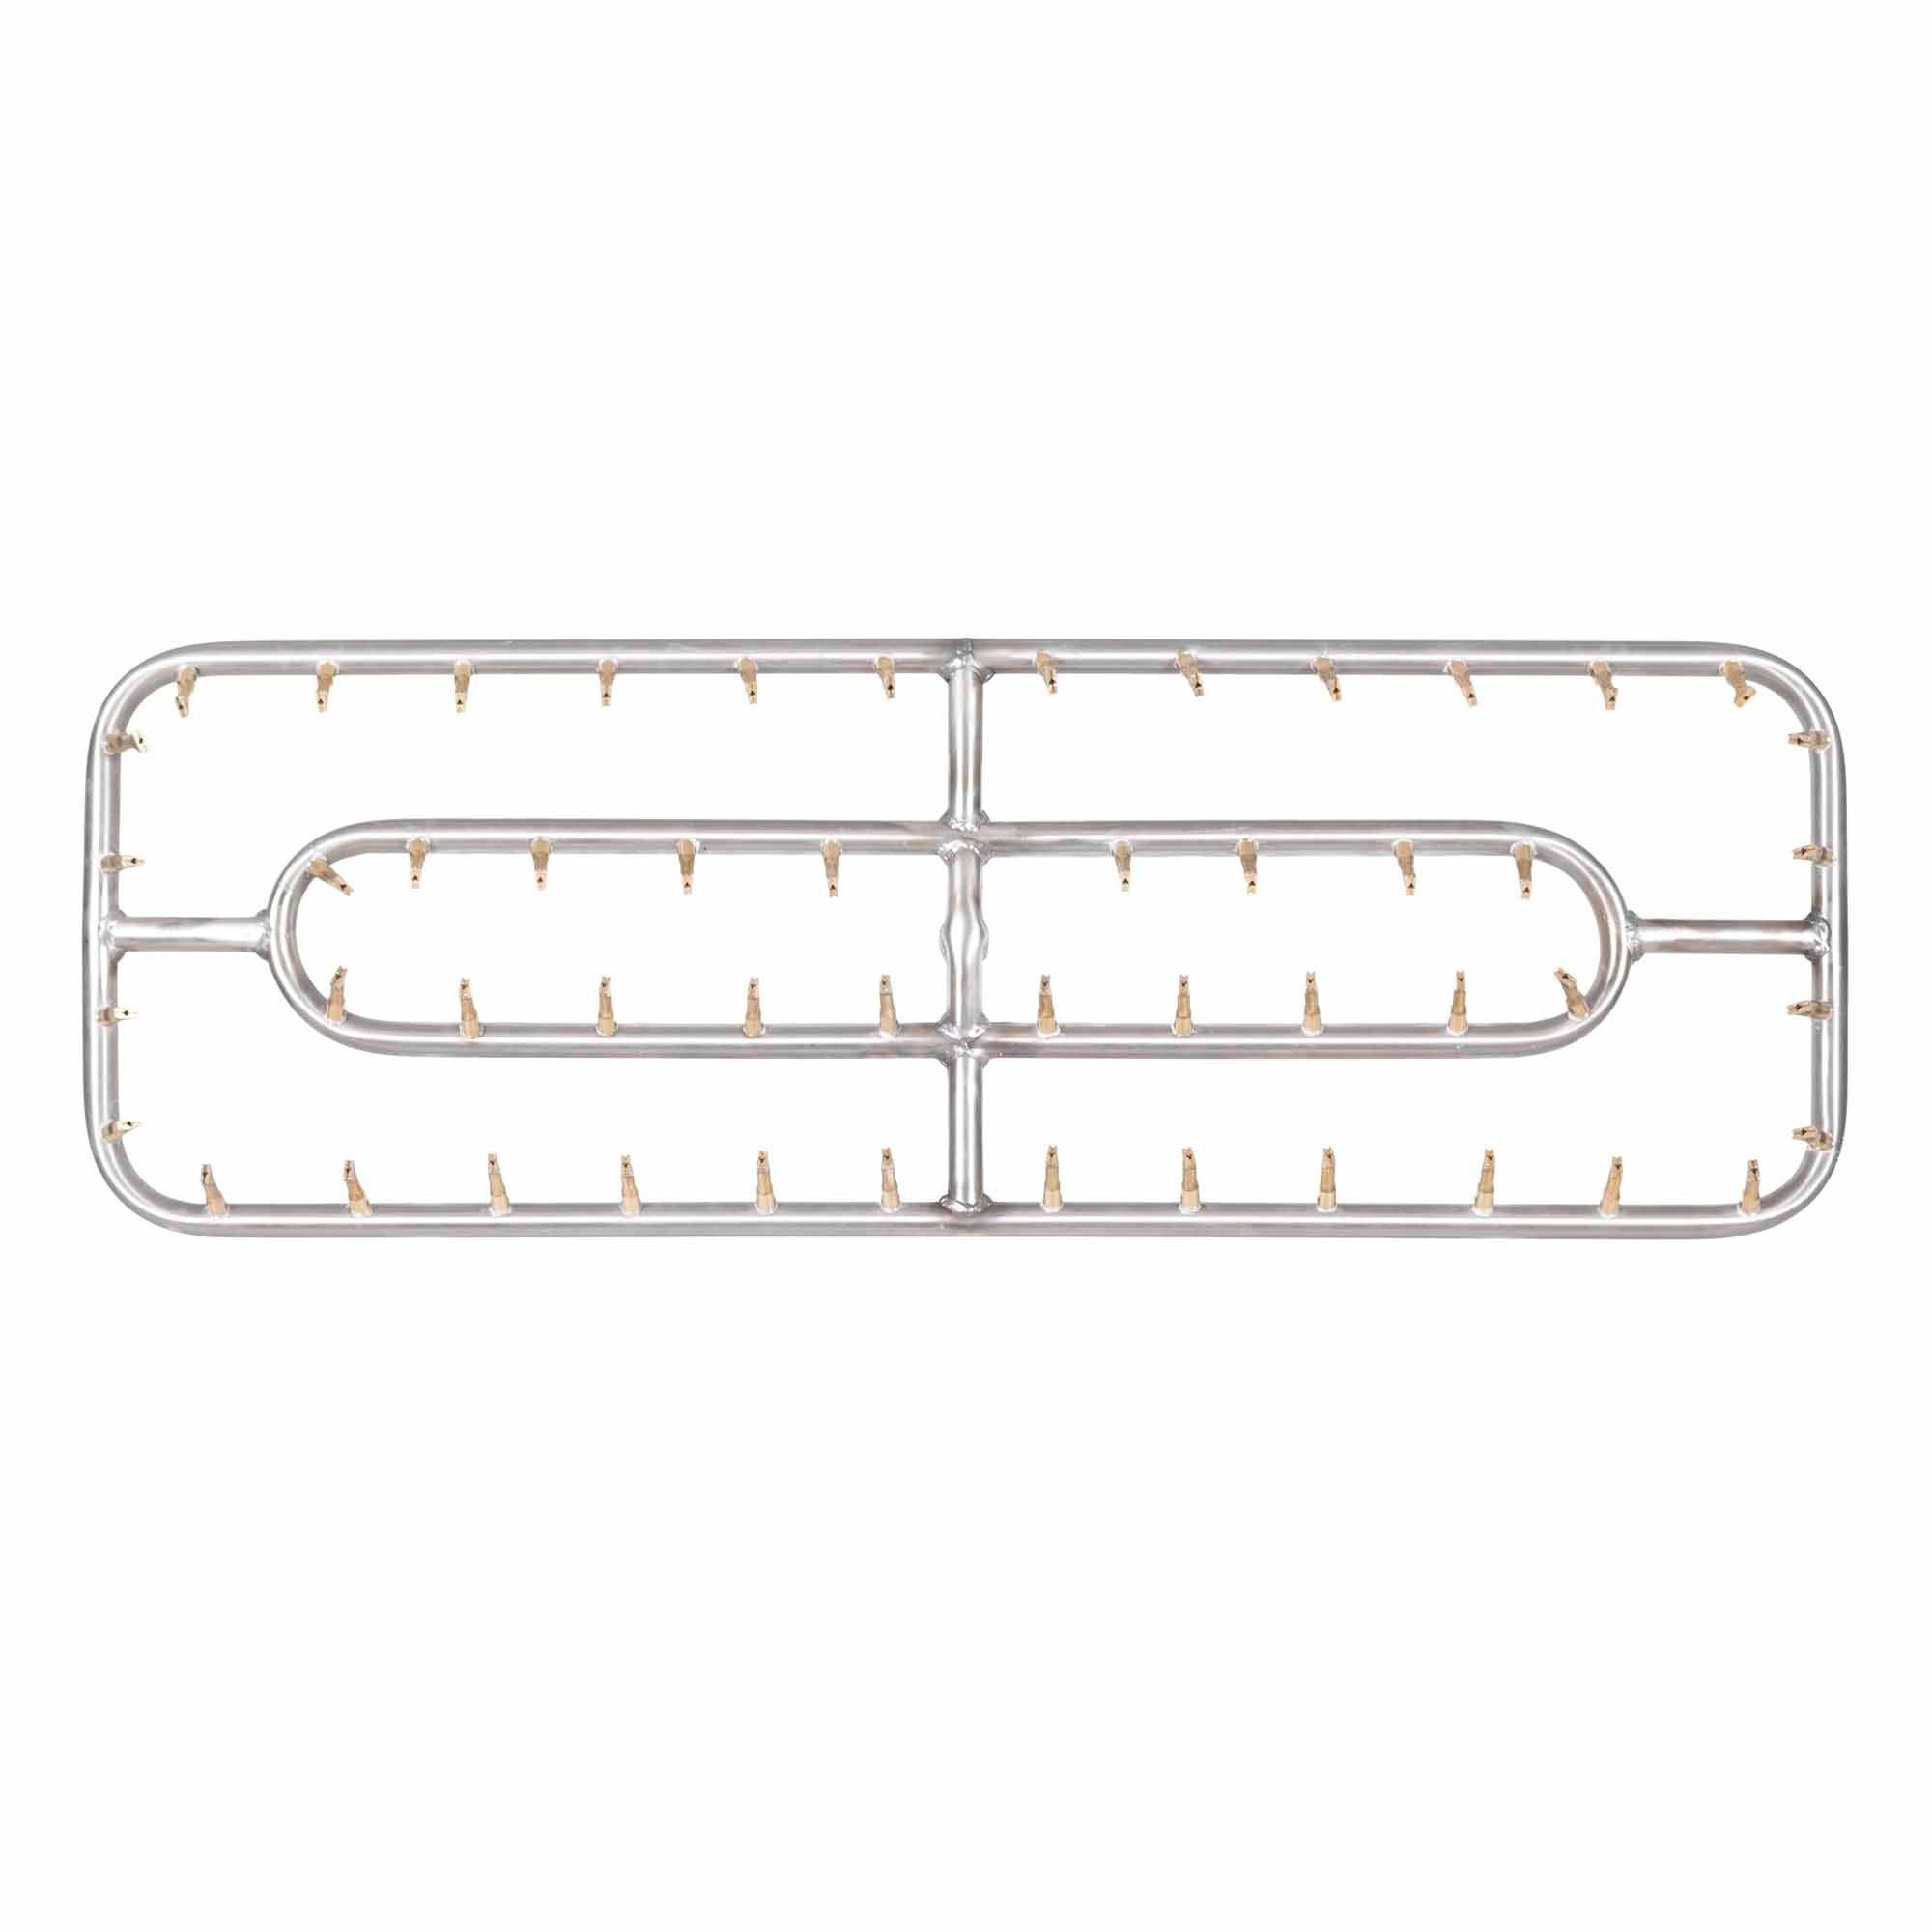 The Outdoor Plus - 24” x 12" Stainless Steel Double Rectangle Bullet Burner - OPT-BDRTSS2412